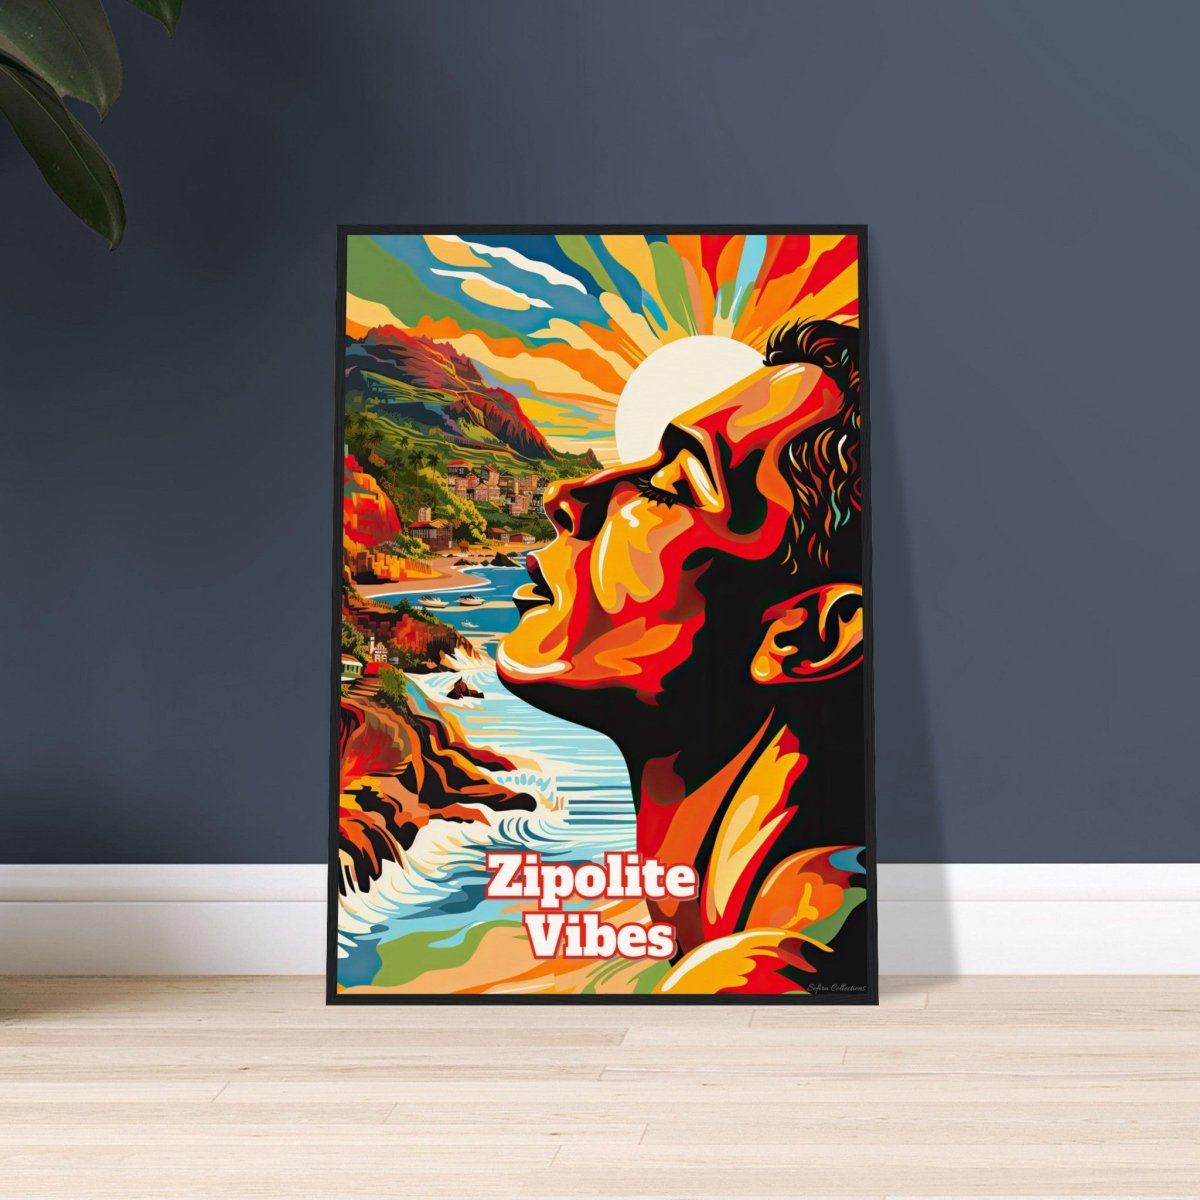 Sefira Zipolite Vibes (v1) Museum-Quality Matte Paper Wooden Framed Poster | Sefira Art Gallery - Print Material - Sefira Collections